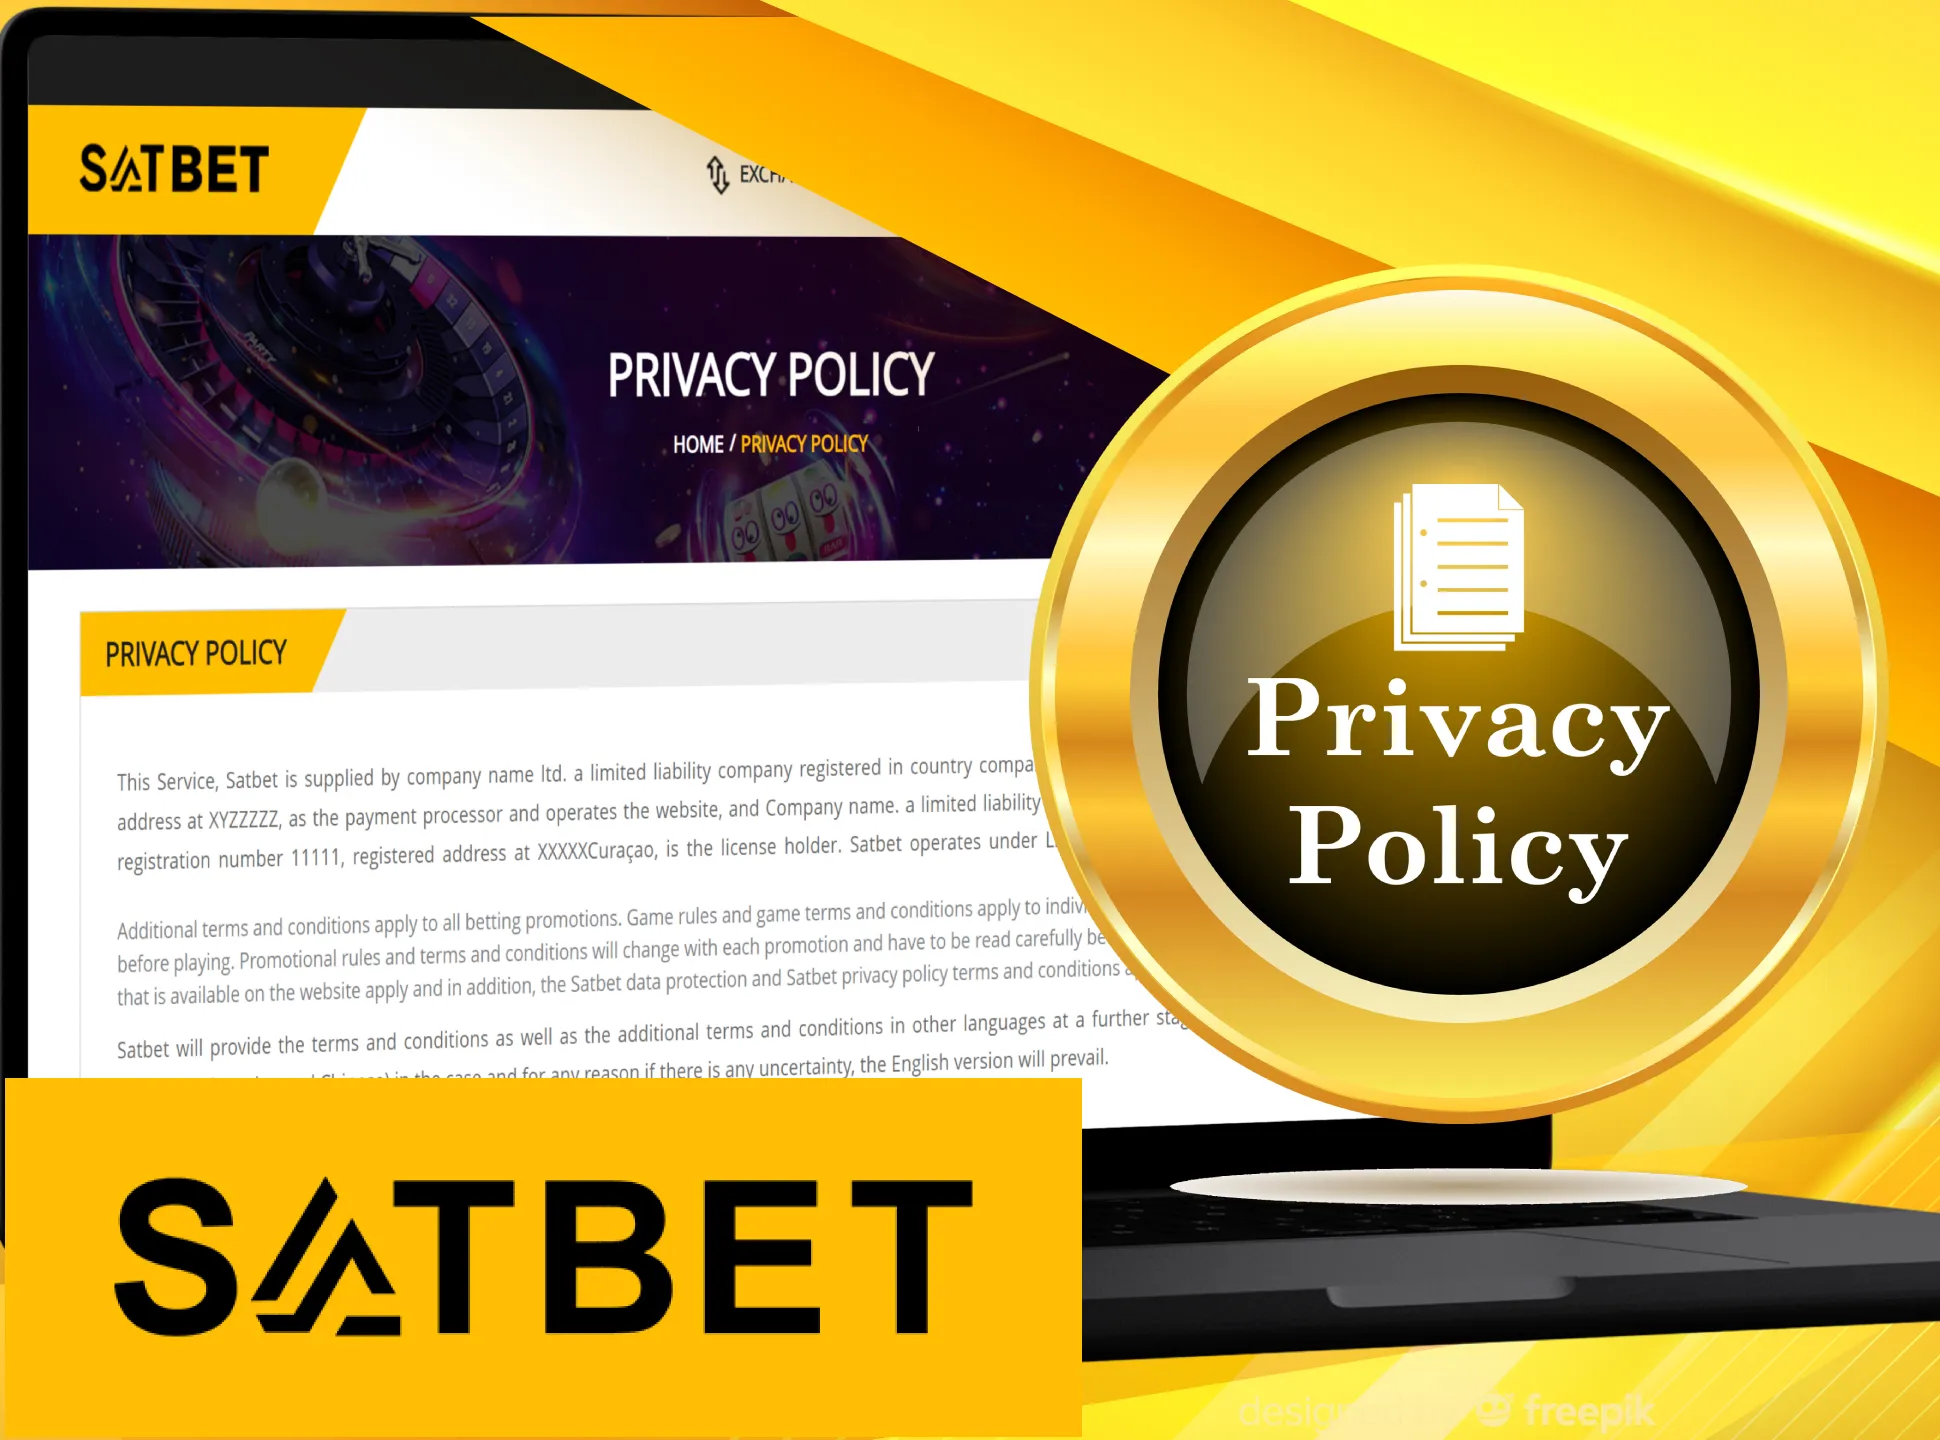 Your information in safe at Satbet.